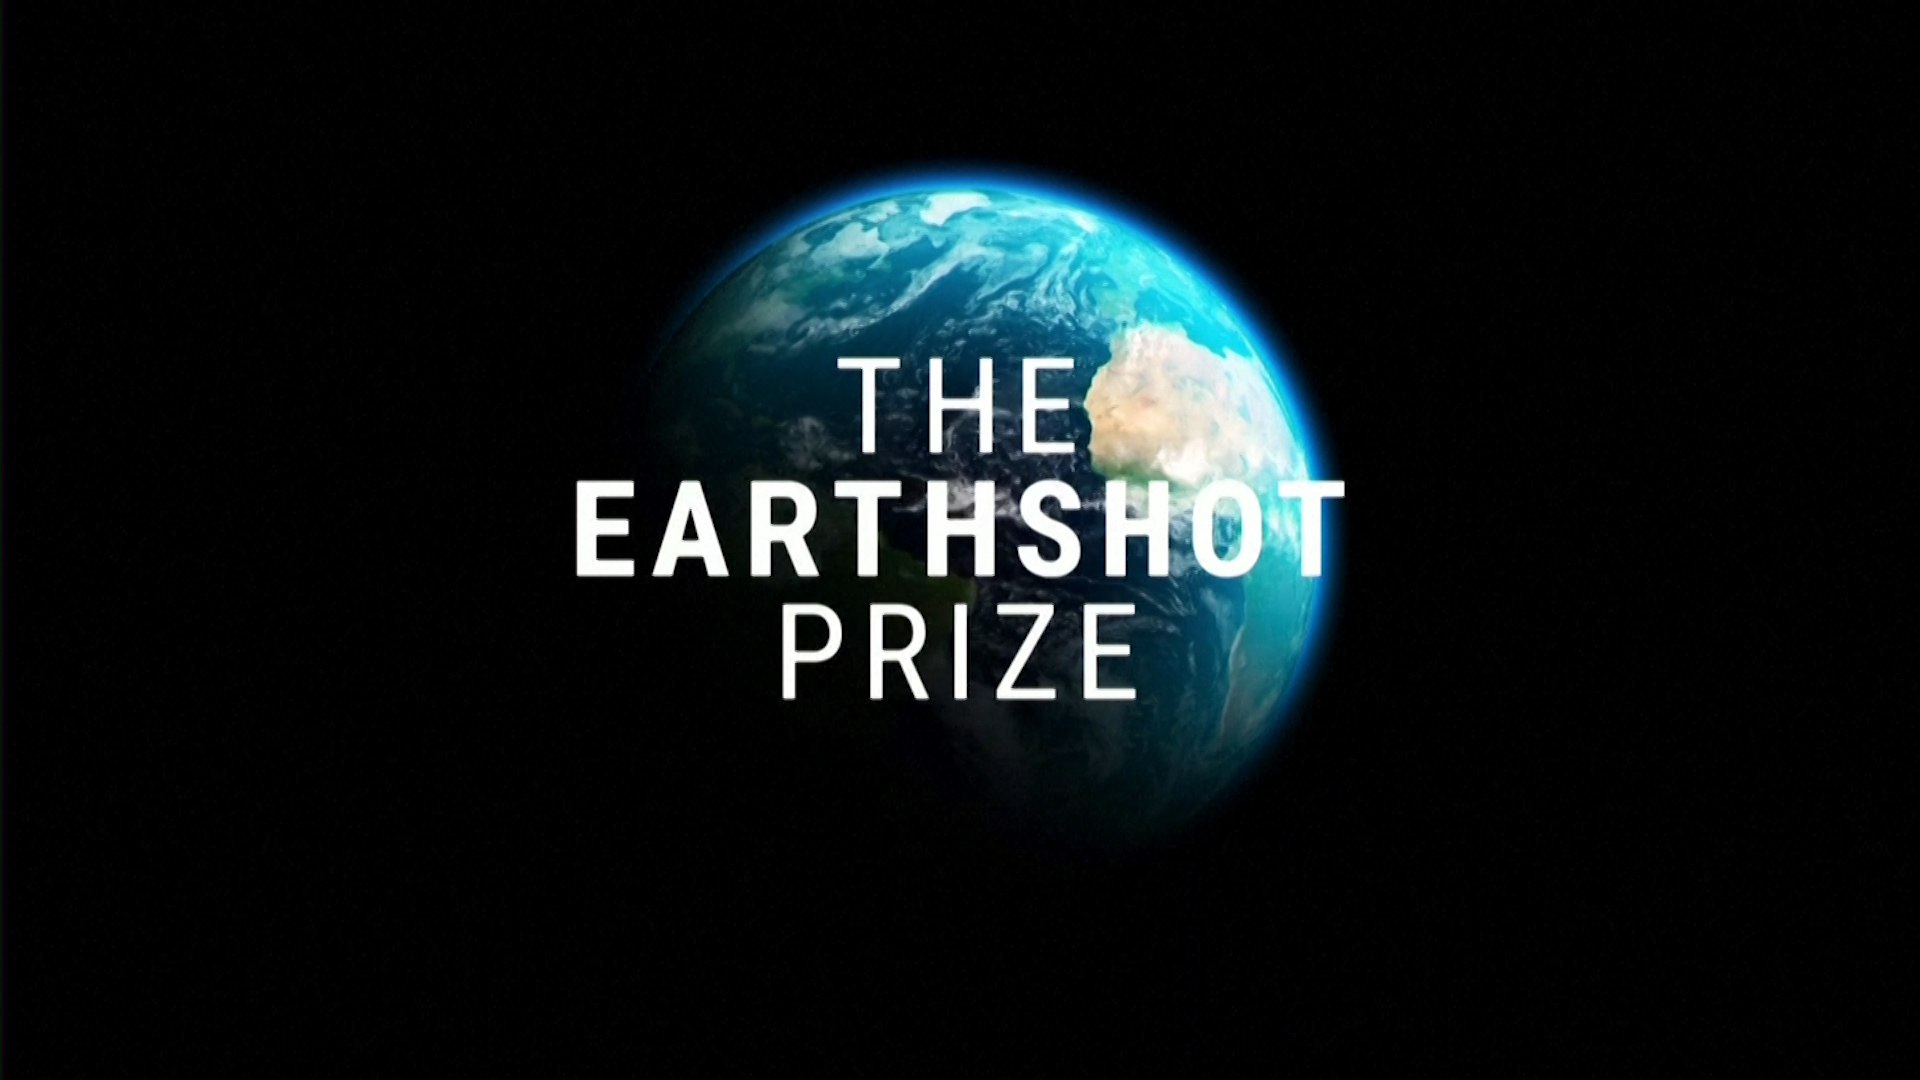 Theearthshotprize